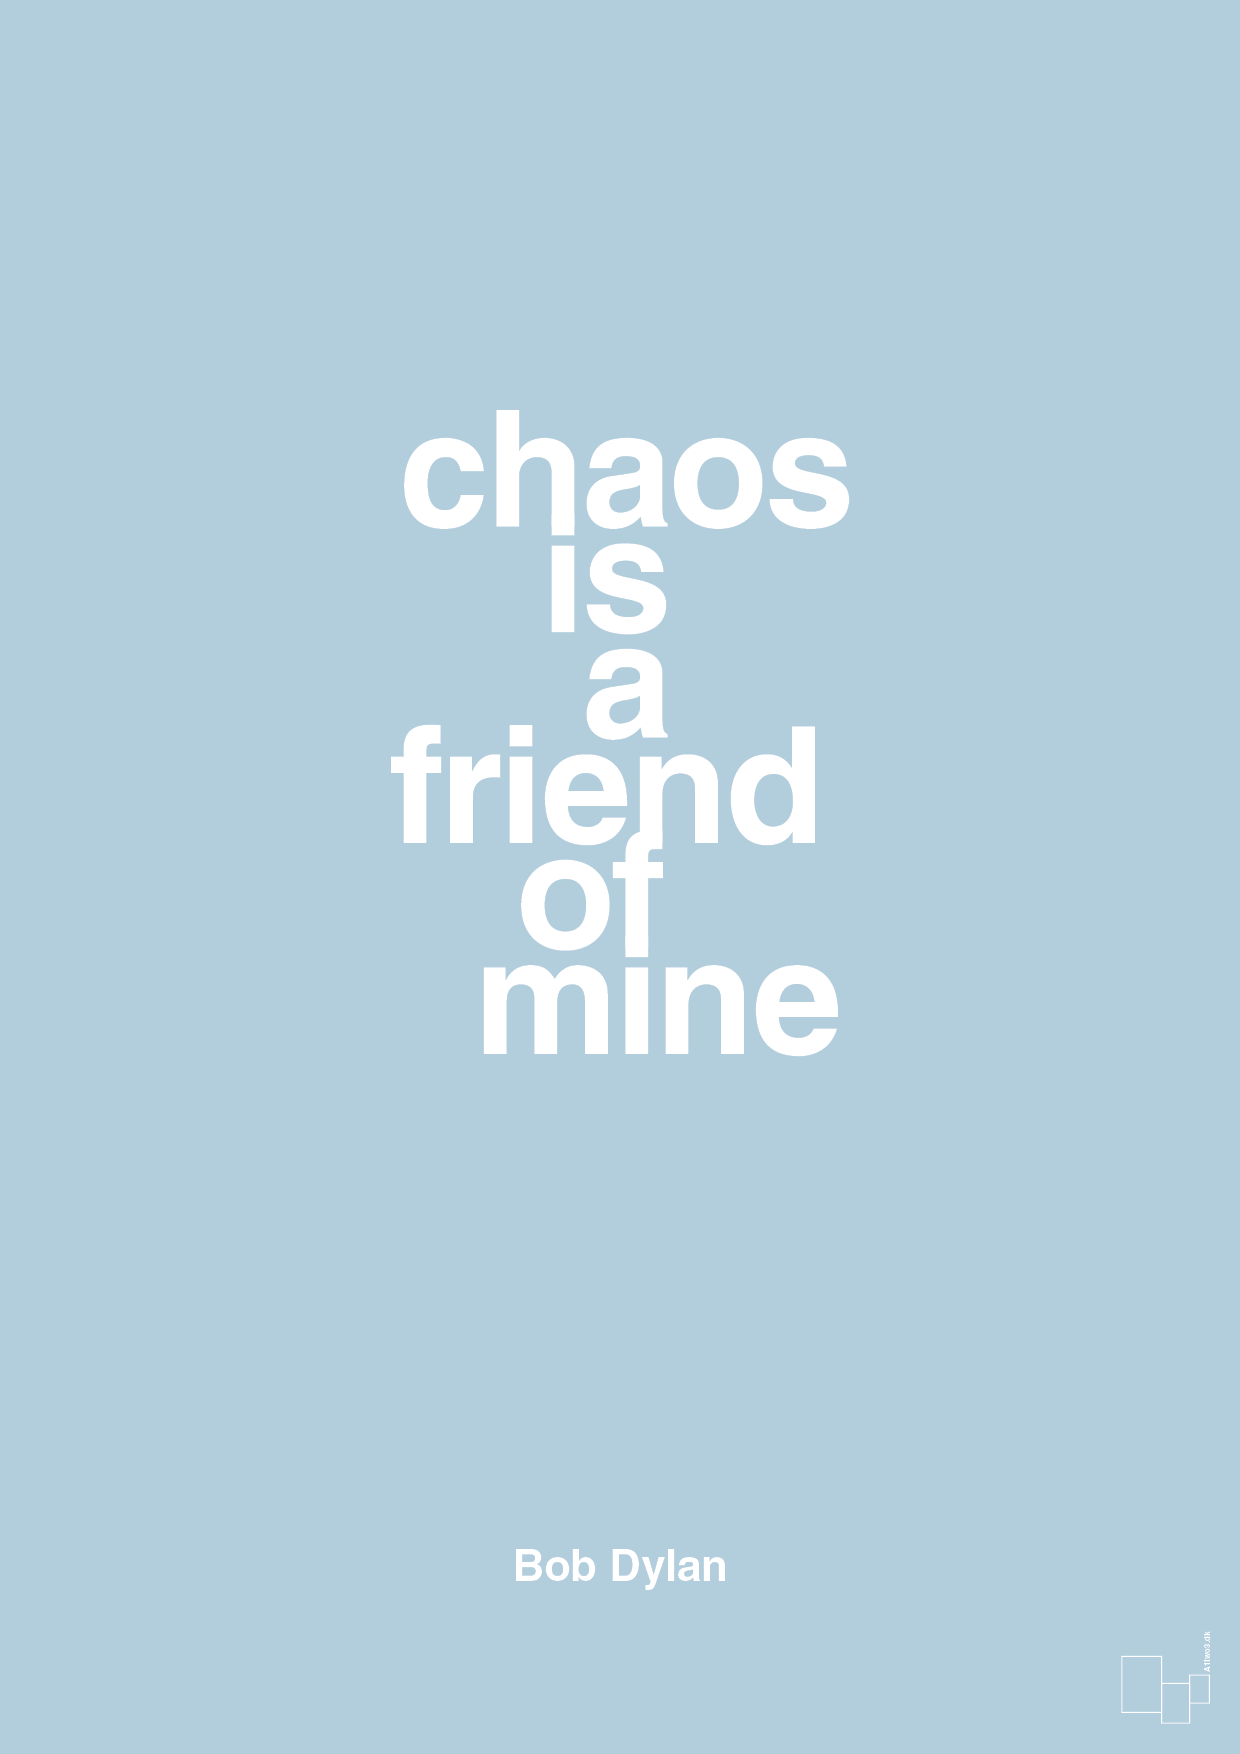 chaos is a friend of mine - Plakat med Citater i Heavenly Blue